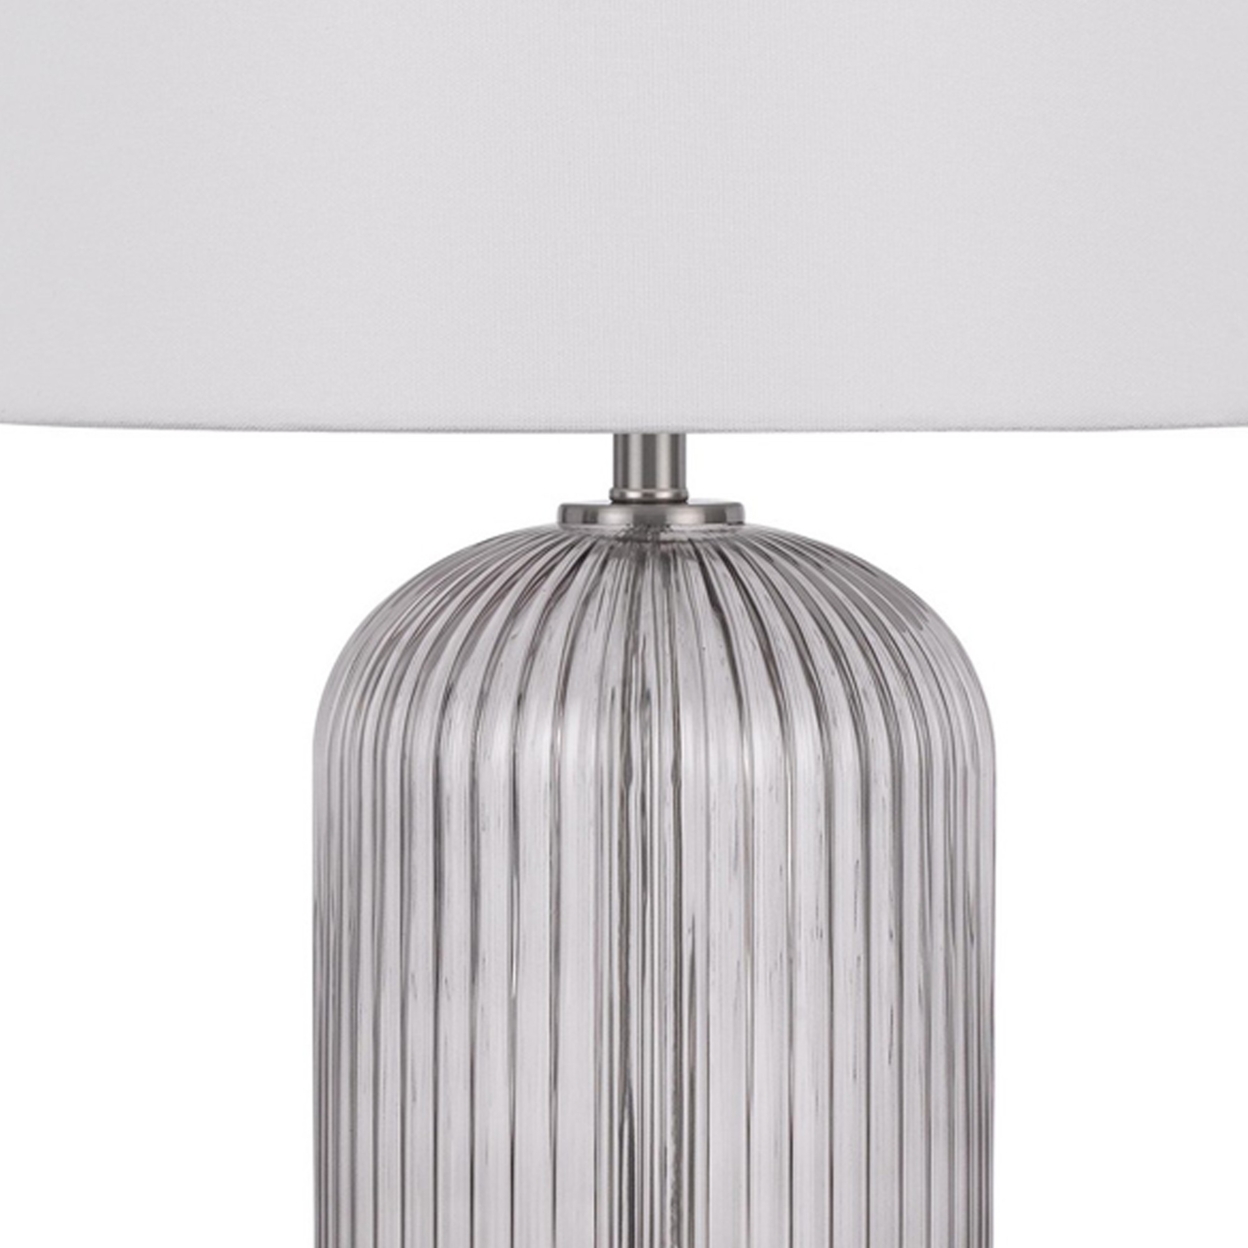 33 Inch Modern Table Lamp, Rounded Glass Fluted Body, Steel Stand, White- Saltoro Sherpi